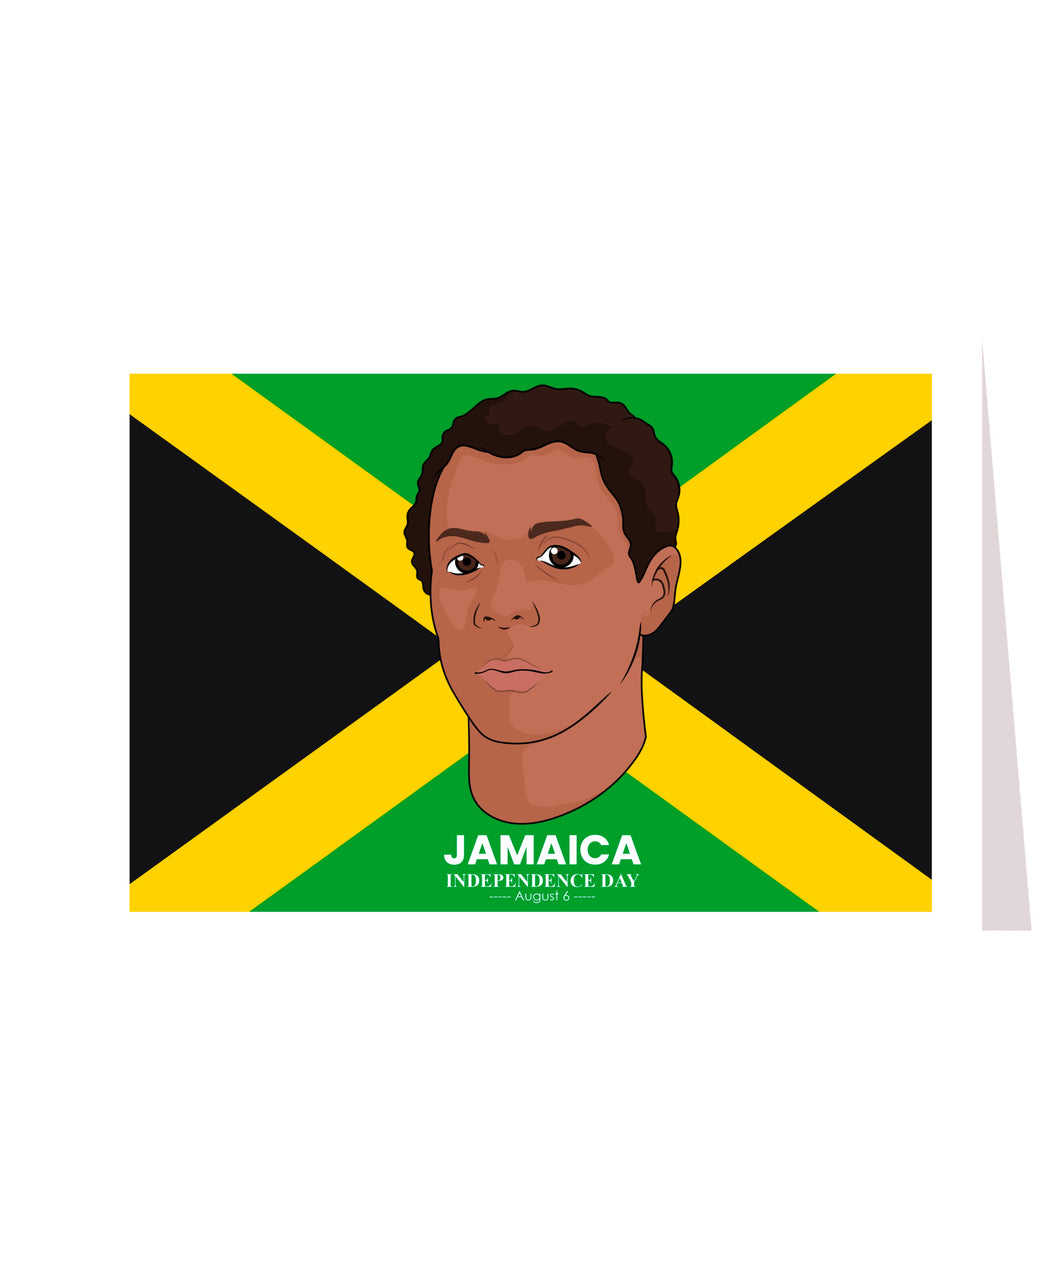 HS032: Samuel Sharpe was proclaimed a national hero of Jamaica in 1975, and his image is on the $50 Jamaican bank note for his role in helping to end slavery on the island.